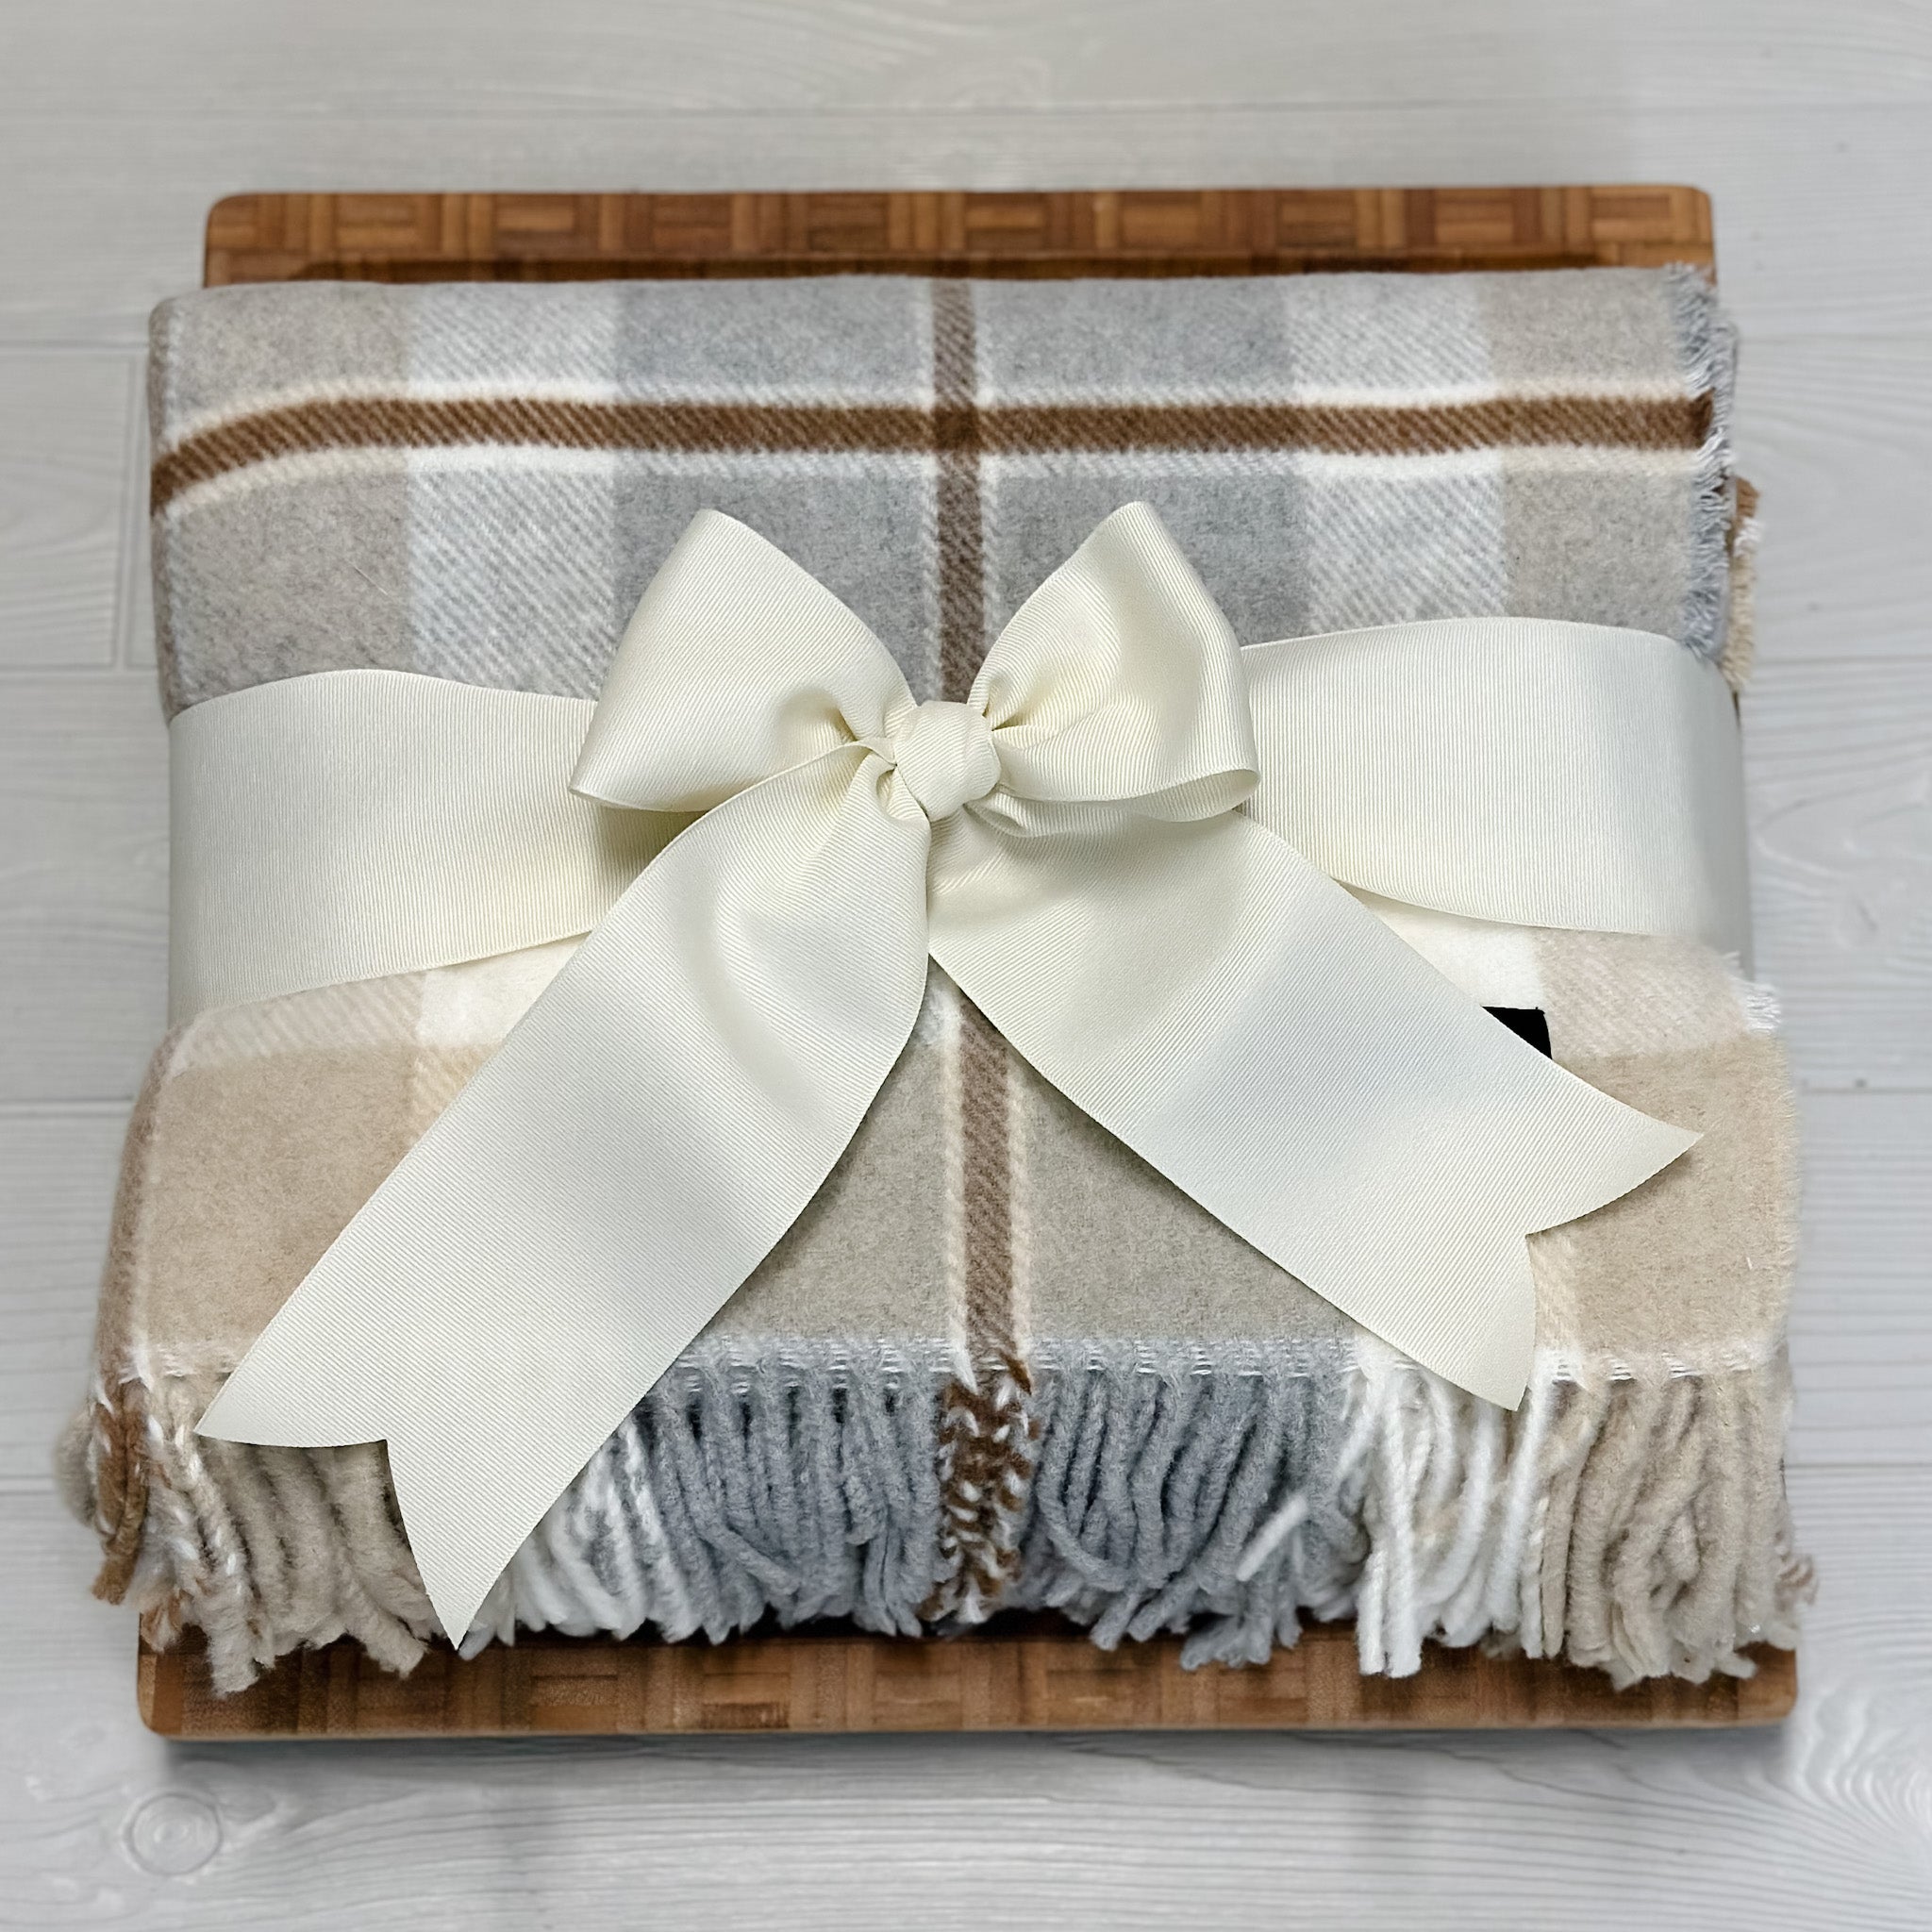 large wooden cutting board, luxury blanket included in our luxury housewarming gift basket